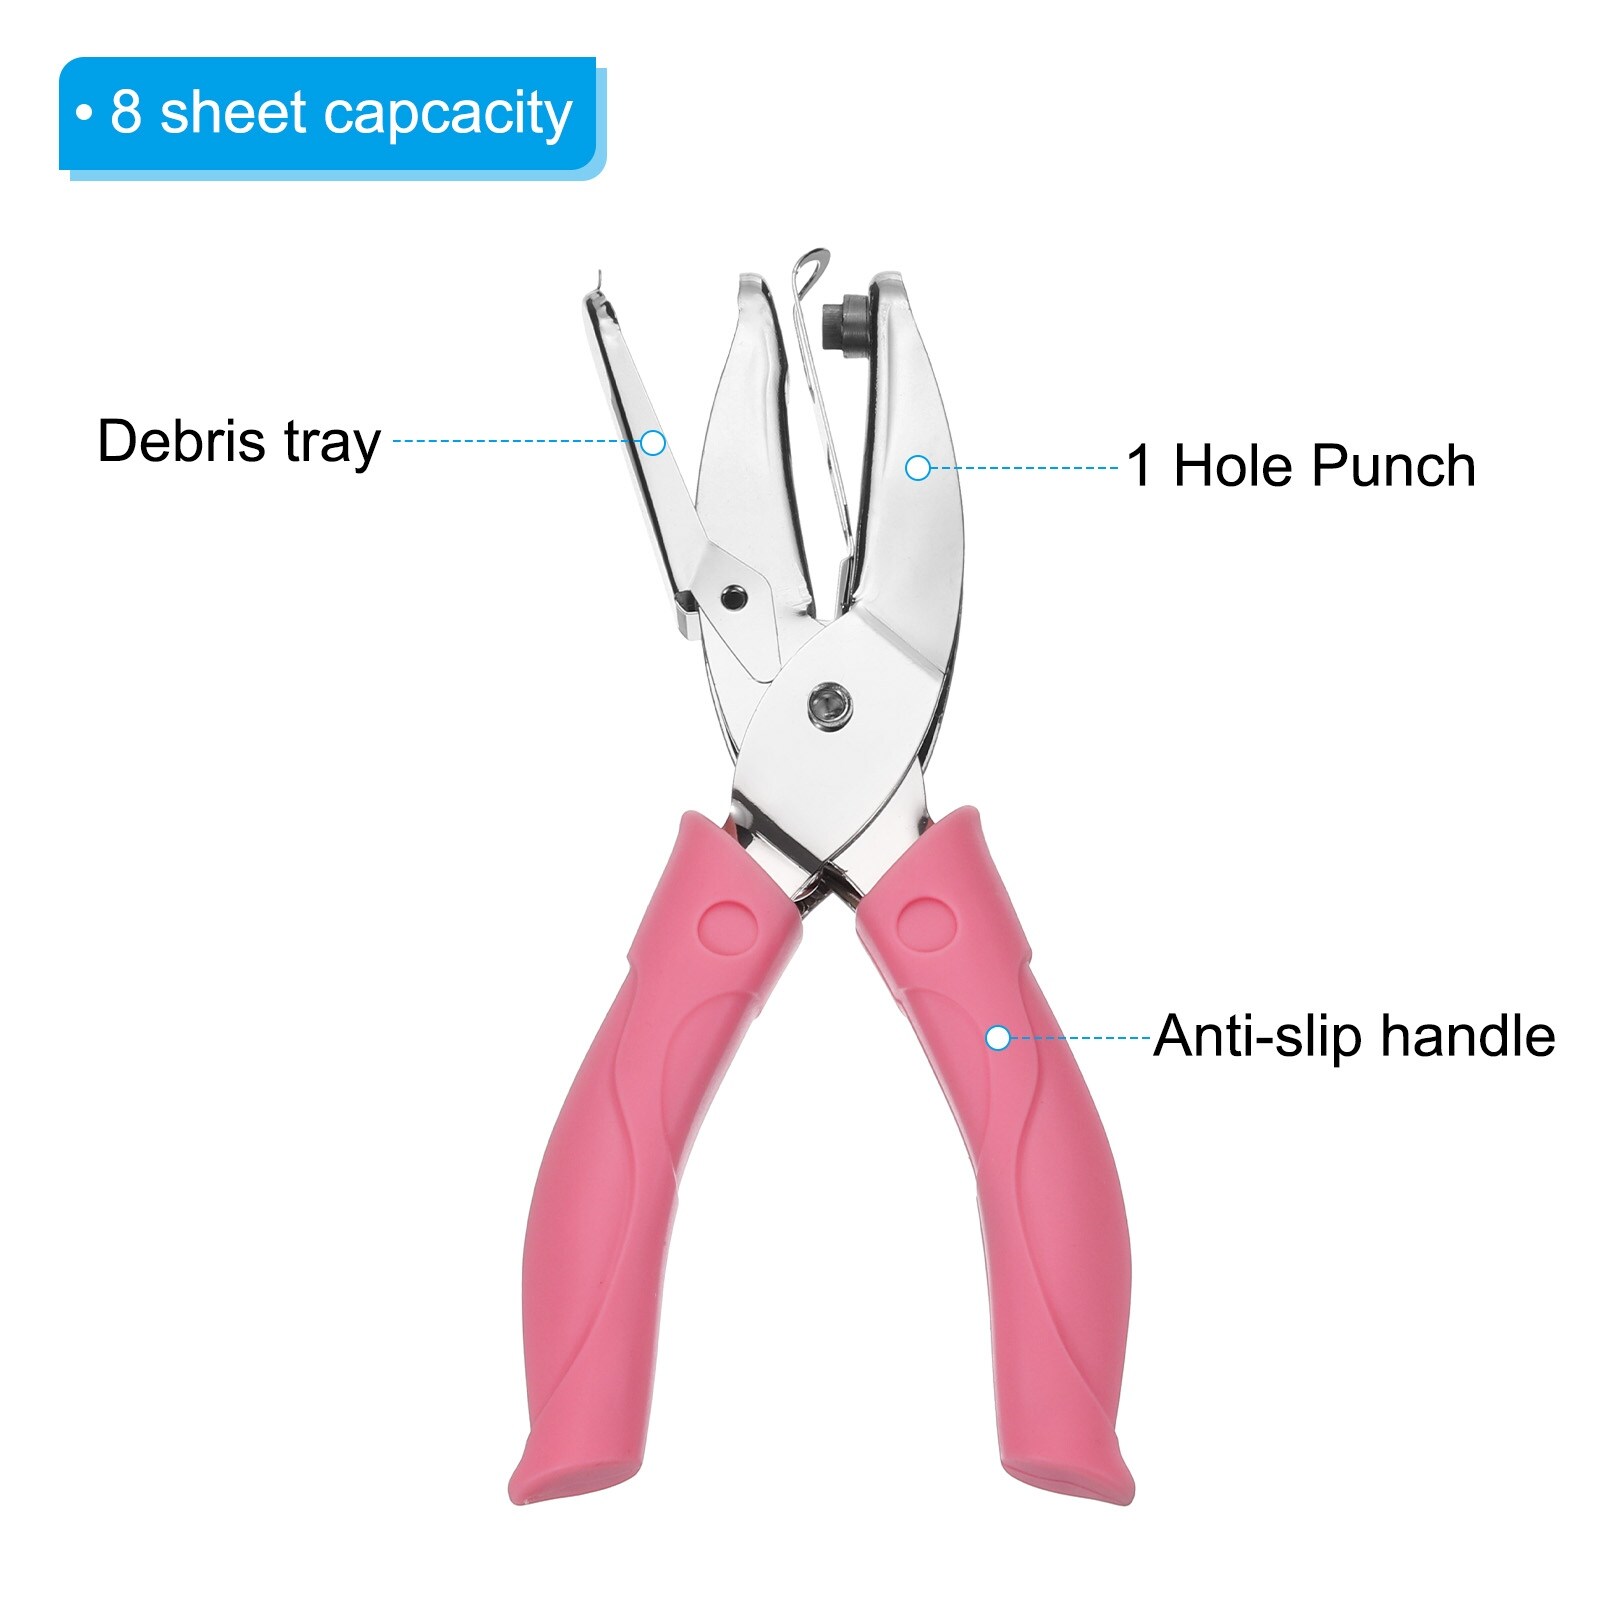 0.2 Single Hole Punch Handheld Hole Puncher Heart Hole Paper Puncher, Pink  2pcs - Bed Bath & Beyond - 37683515